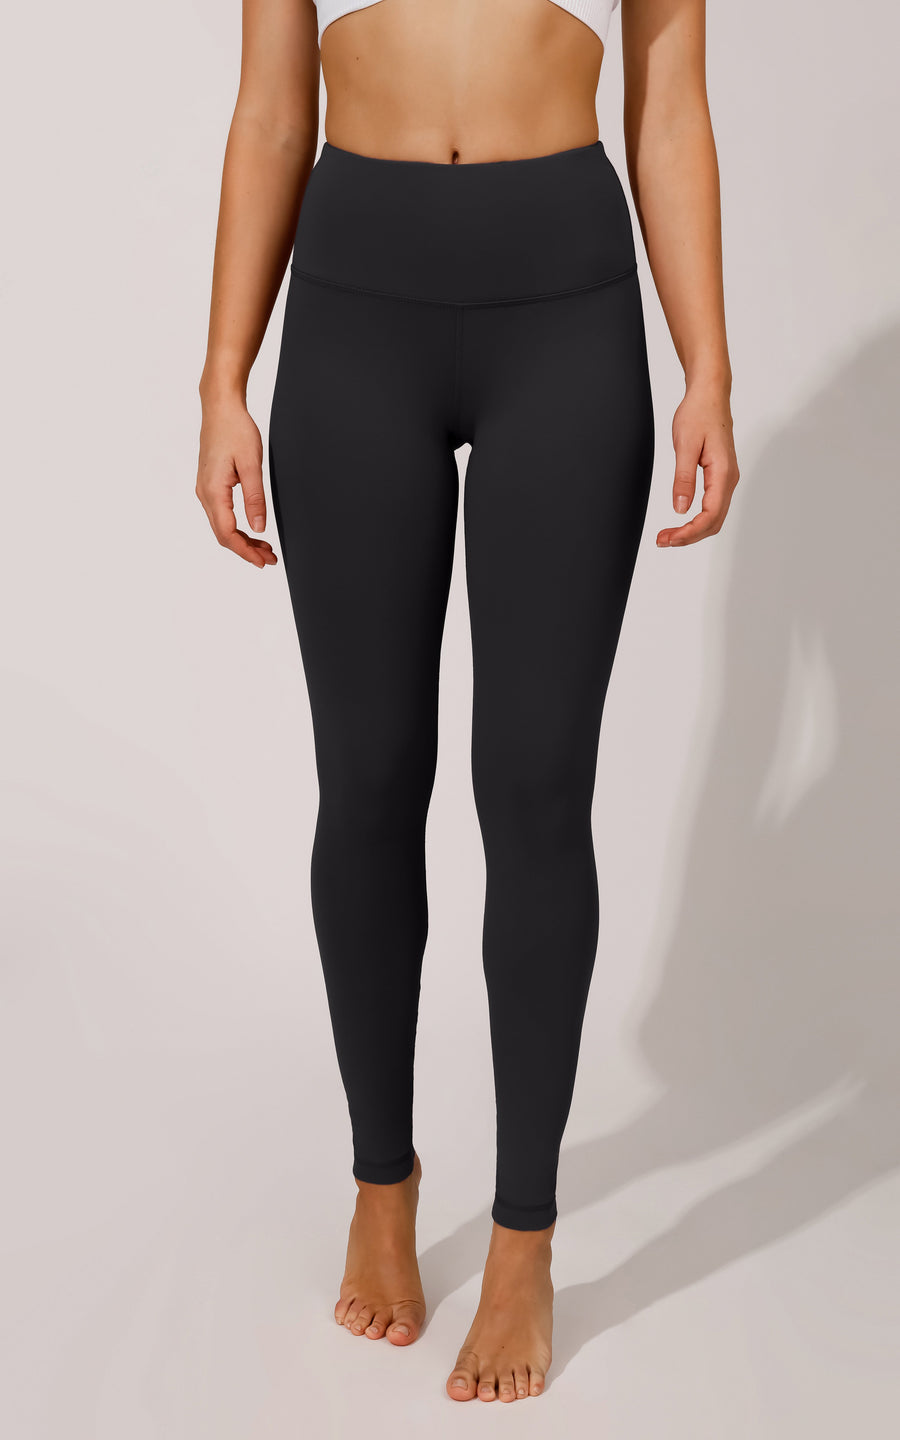 ZZAL High-Waisted Leggings Tight Leggings for Women with High Waist Tight  Booty Gym Leggings for Covering the Belly (Size: L, Colour: Khaki) :  : Fashion